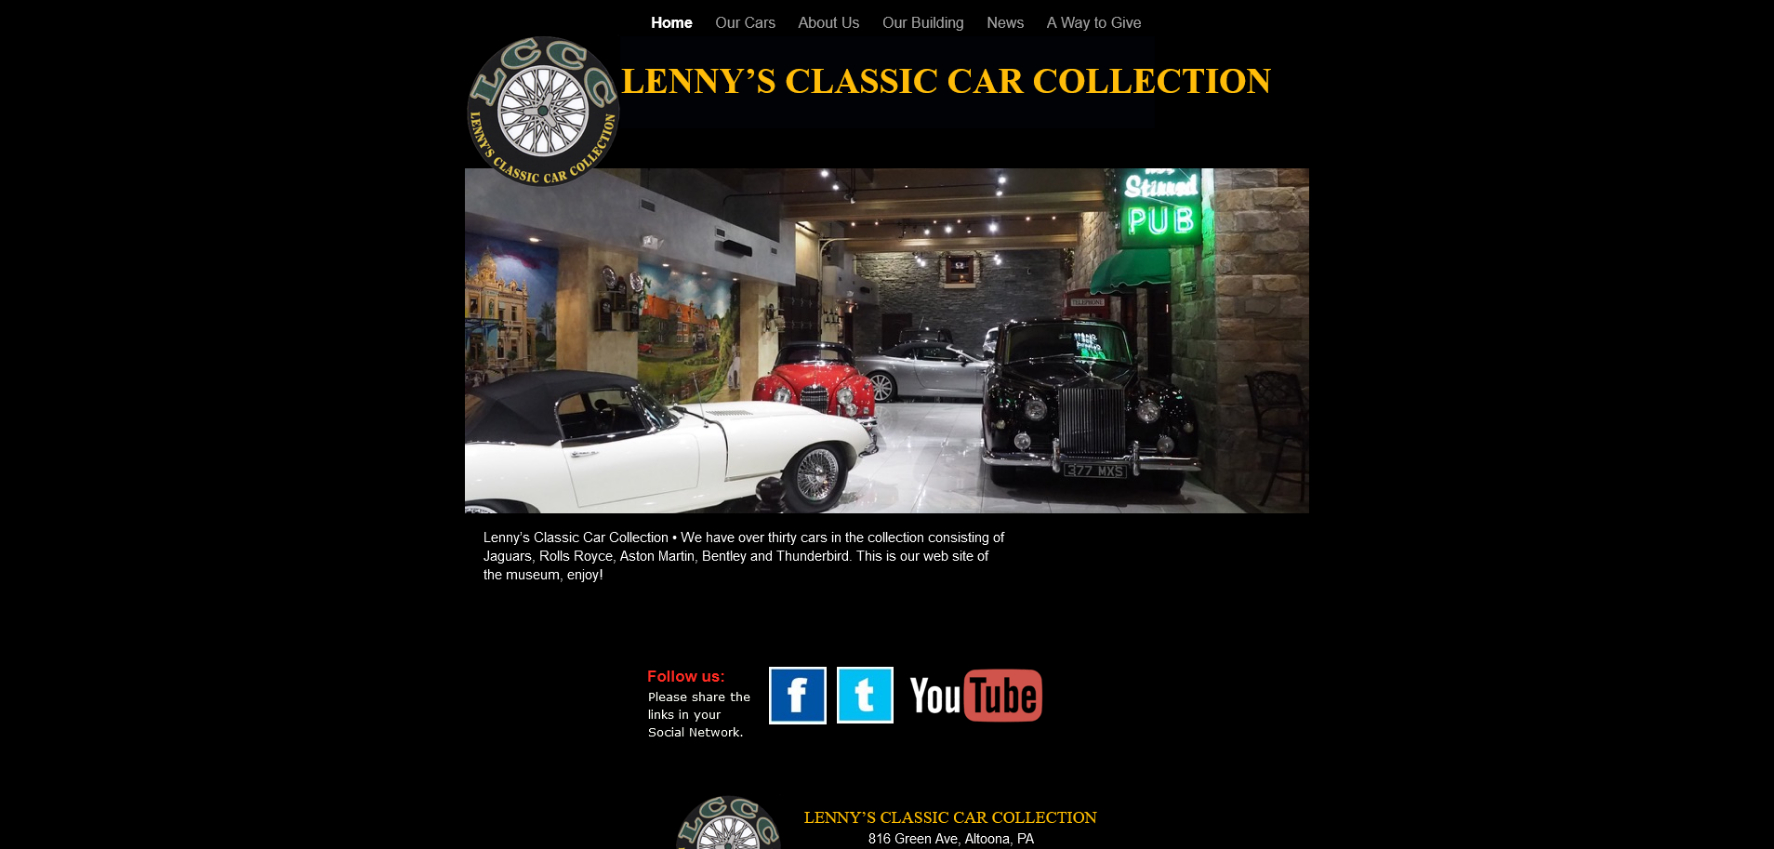 Lenny’s Classic Car Collection